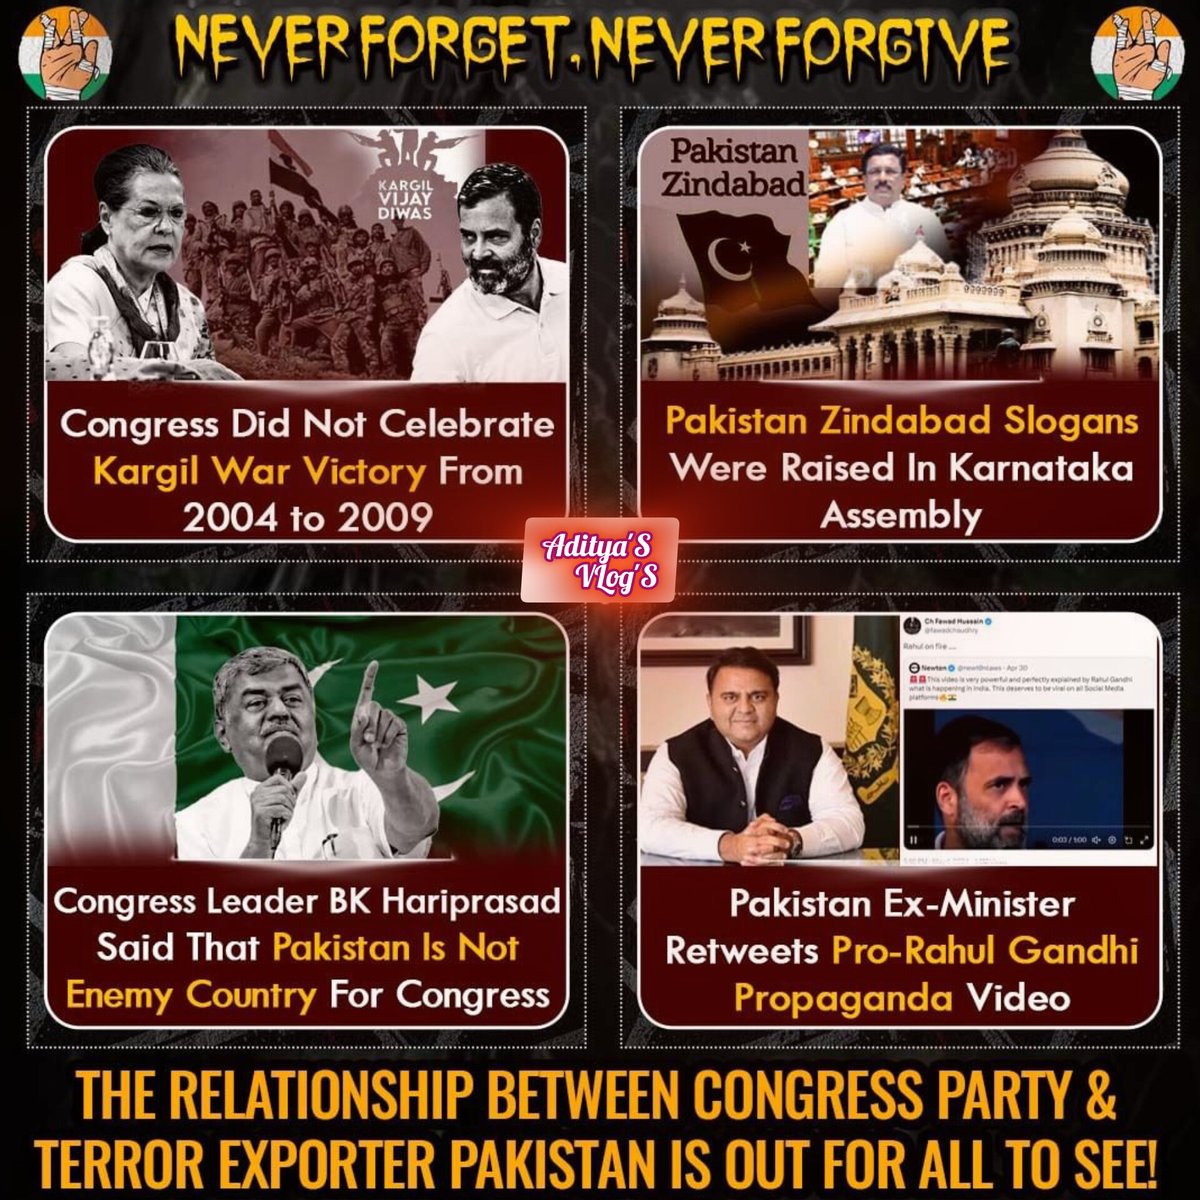 @TimesAlgebraIND The relationship between congress party and terror exporter Pakistan is out of for all to see.